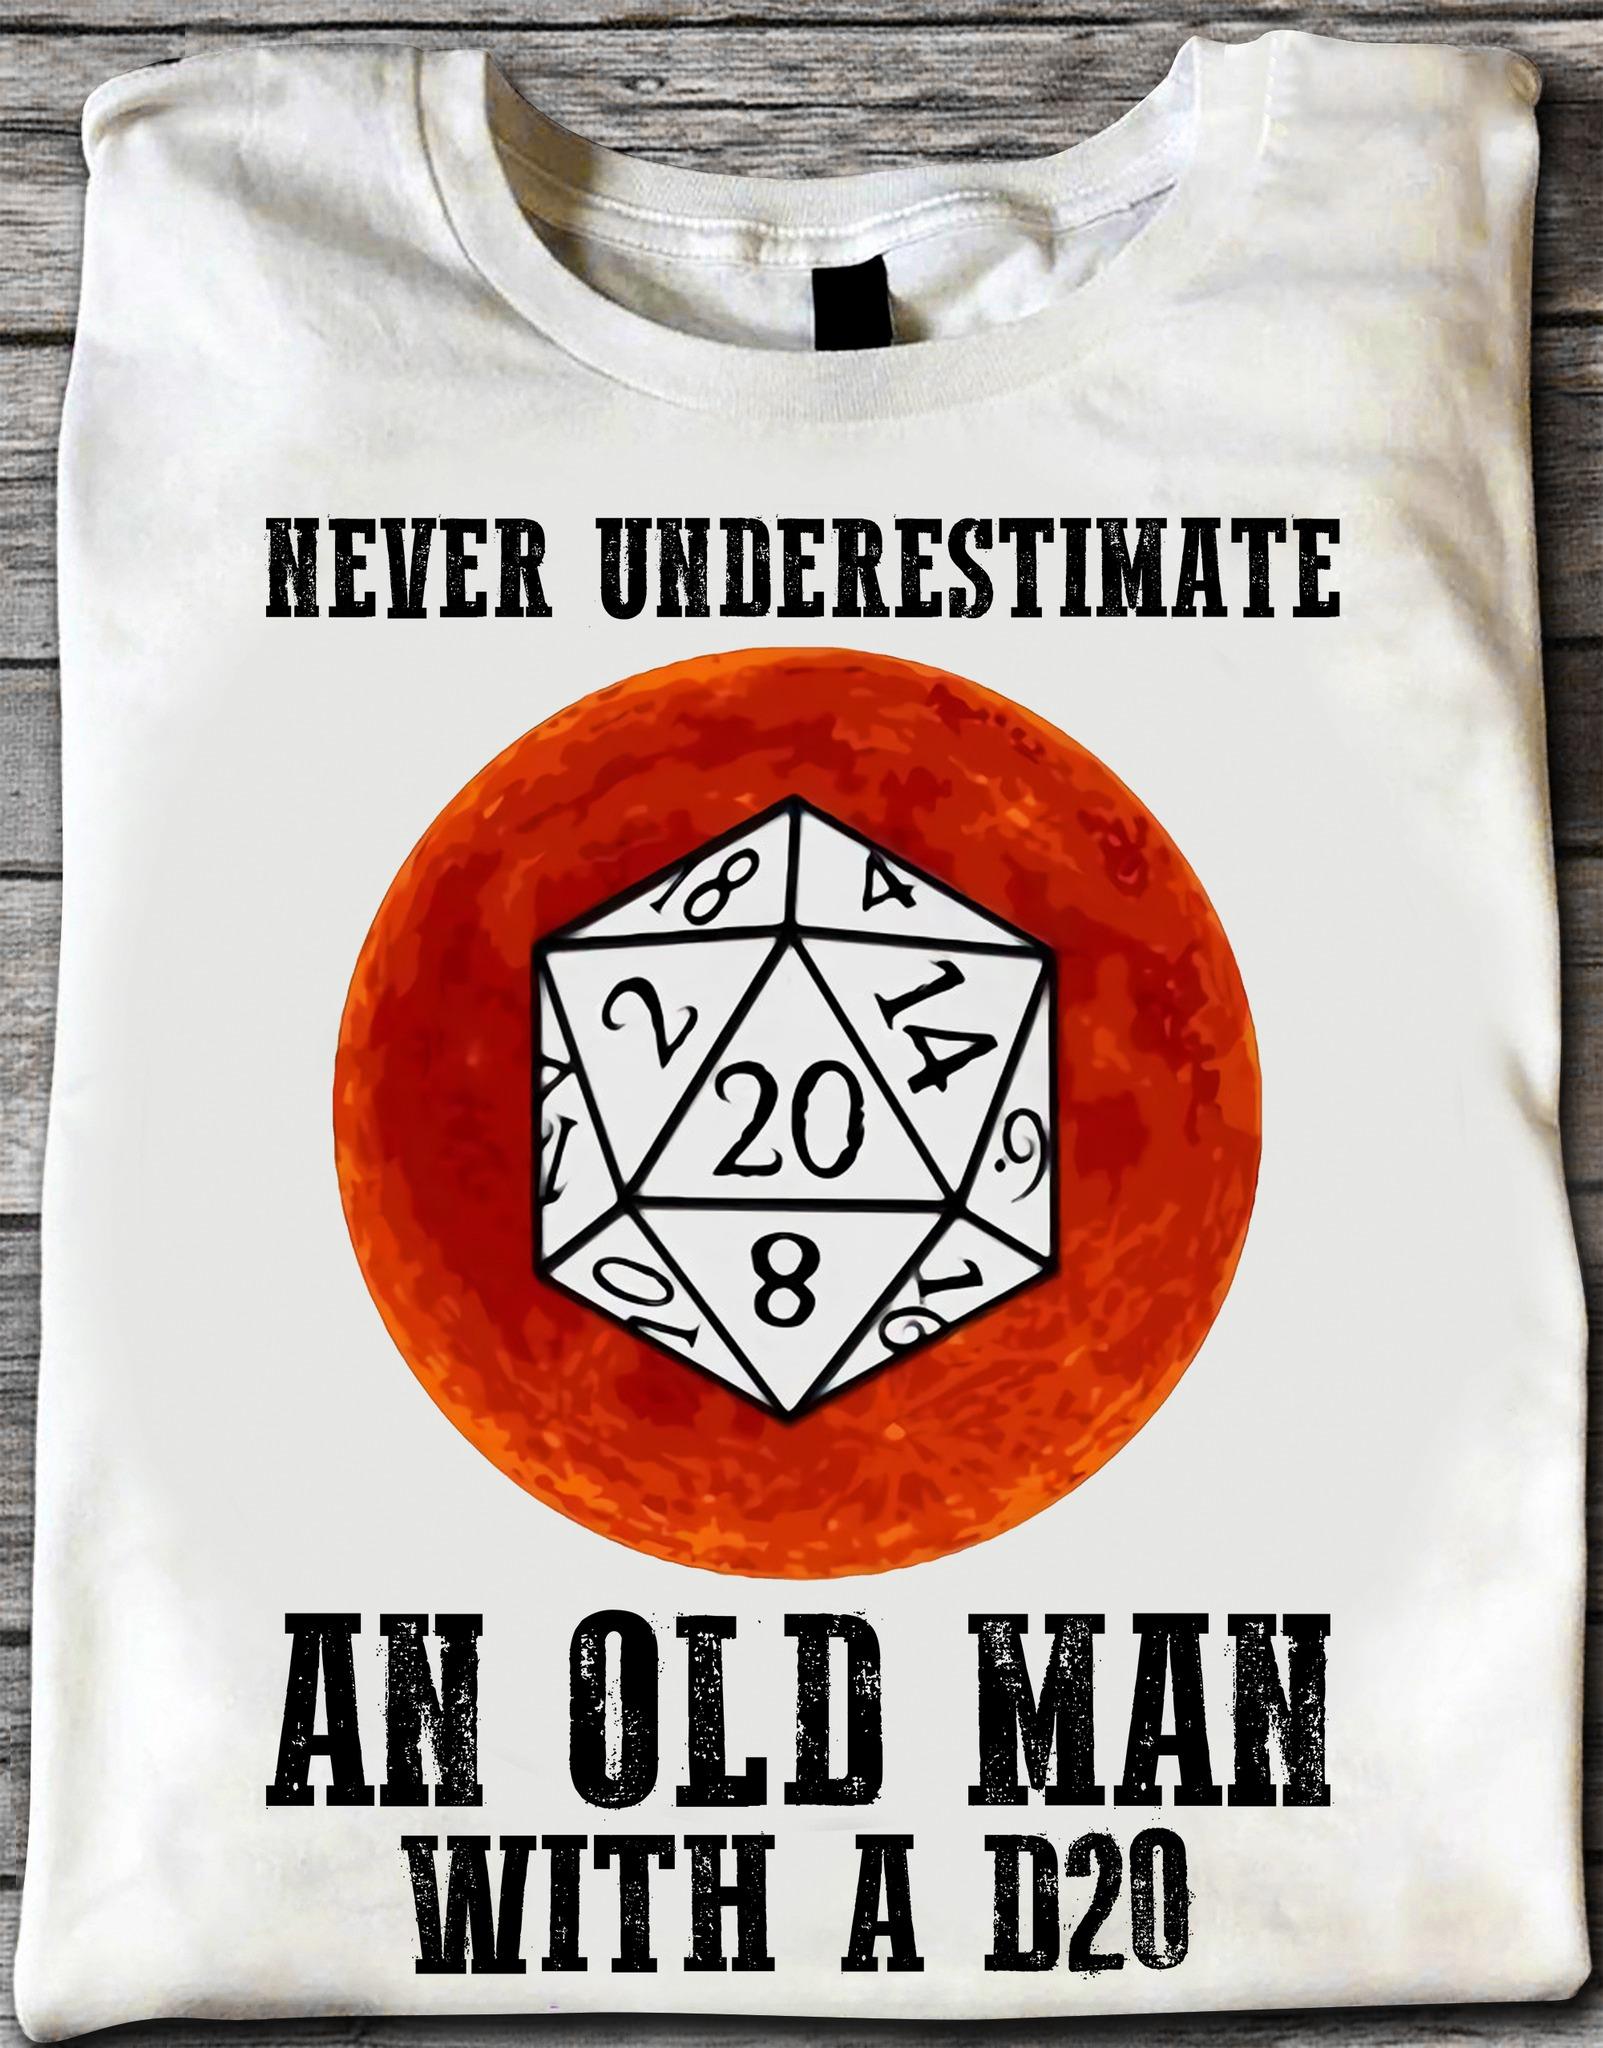 Never underestimate an old man with a D20 - Dungeons and Dragons, D20 dices